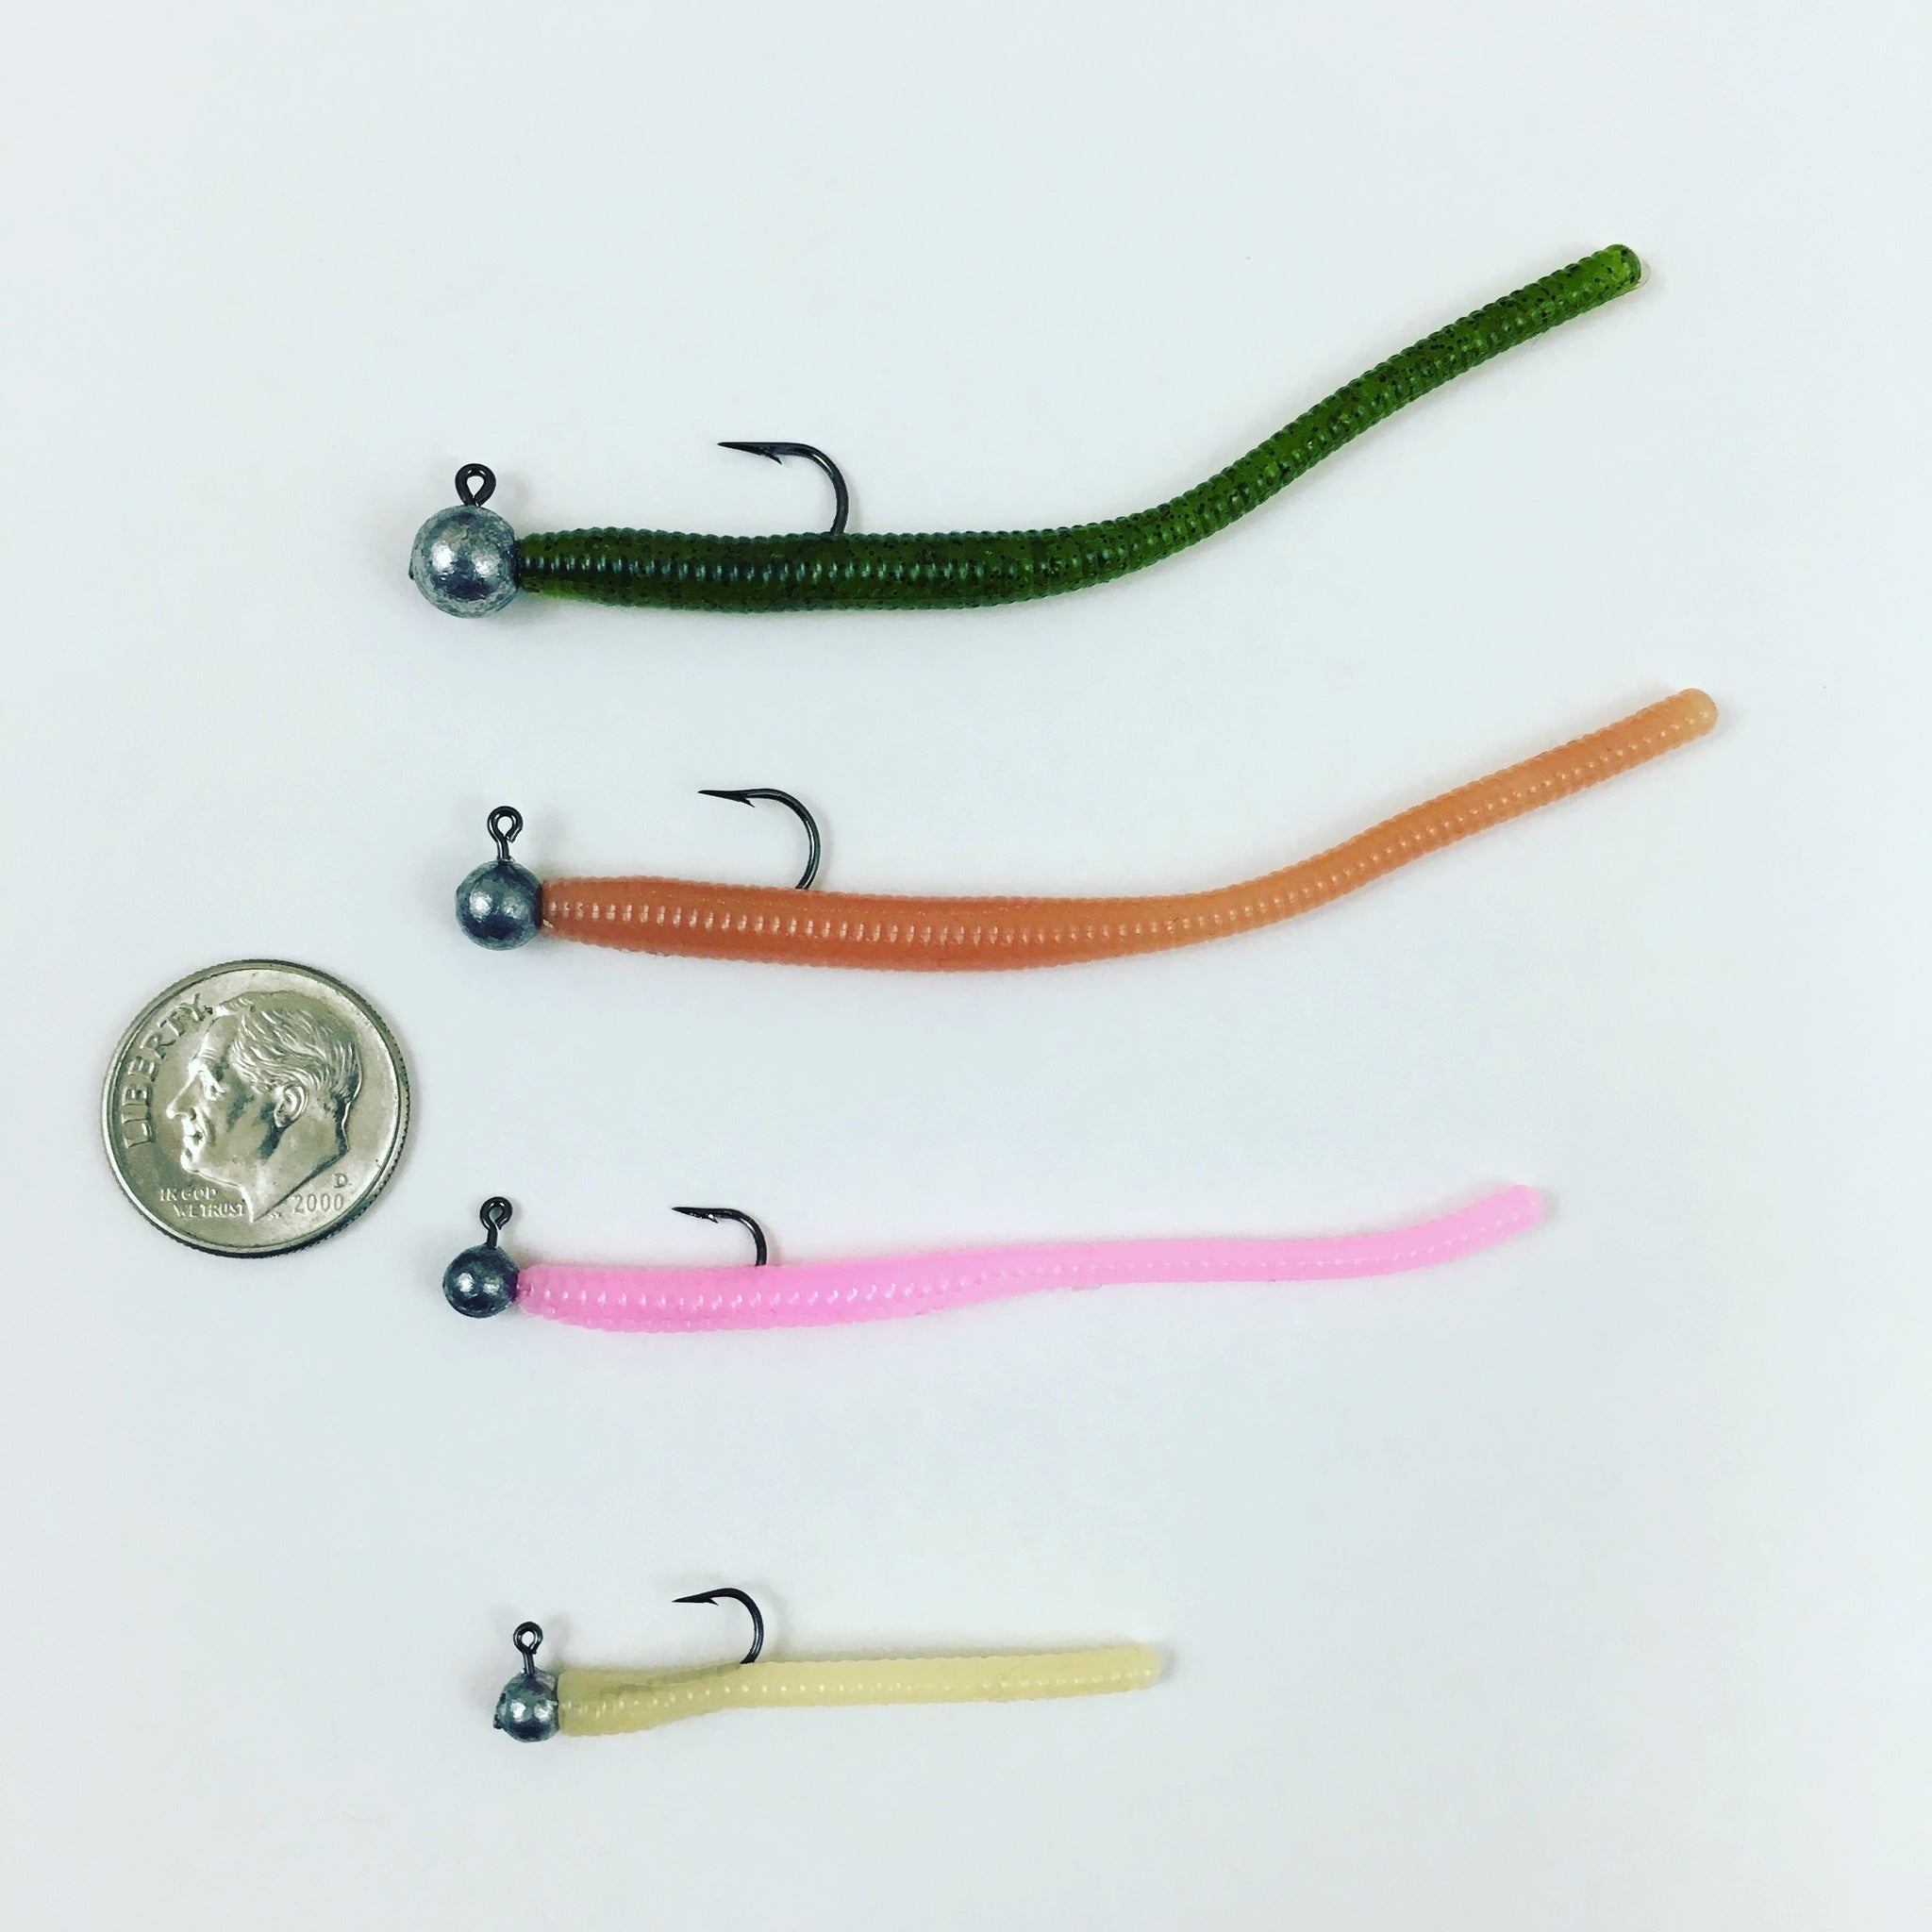 Carolina Rig & Floating Trout Worm - Other Fish Species - Bass